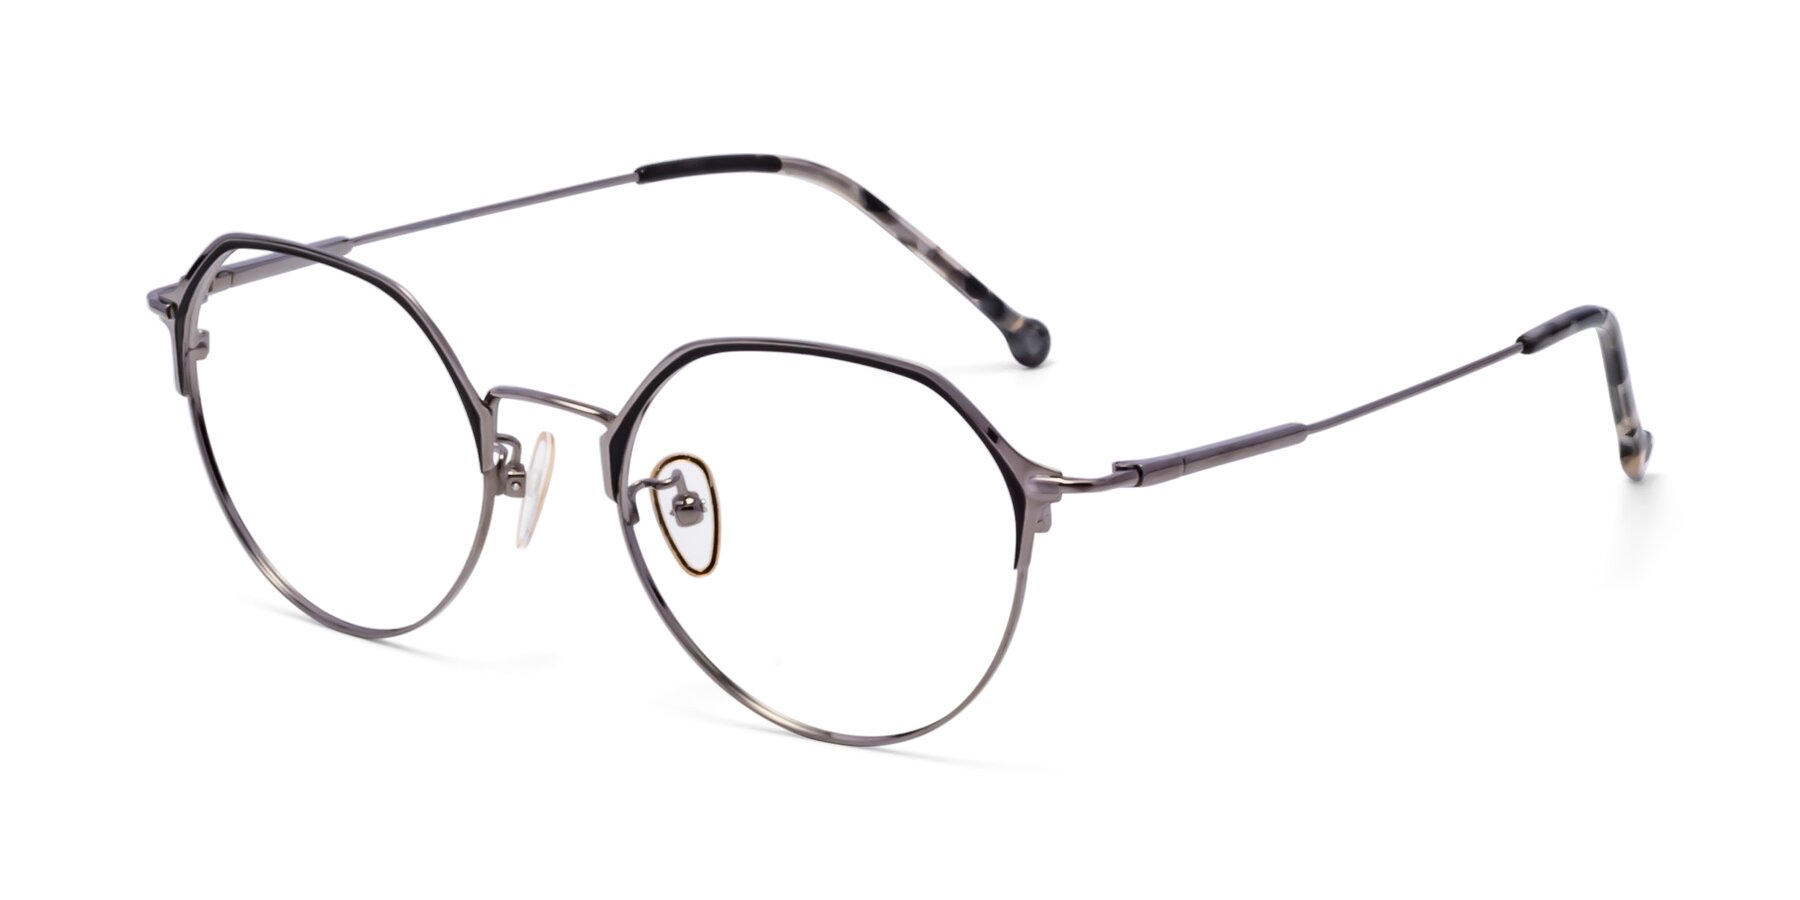 Angle of 18014 in Black-Gunmetal with Clear Blue Light Blocking Lenses